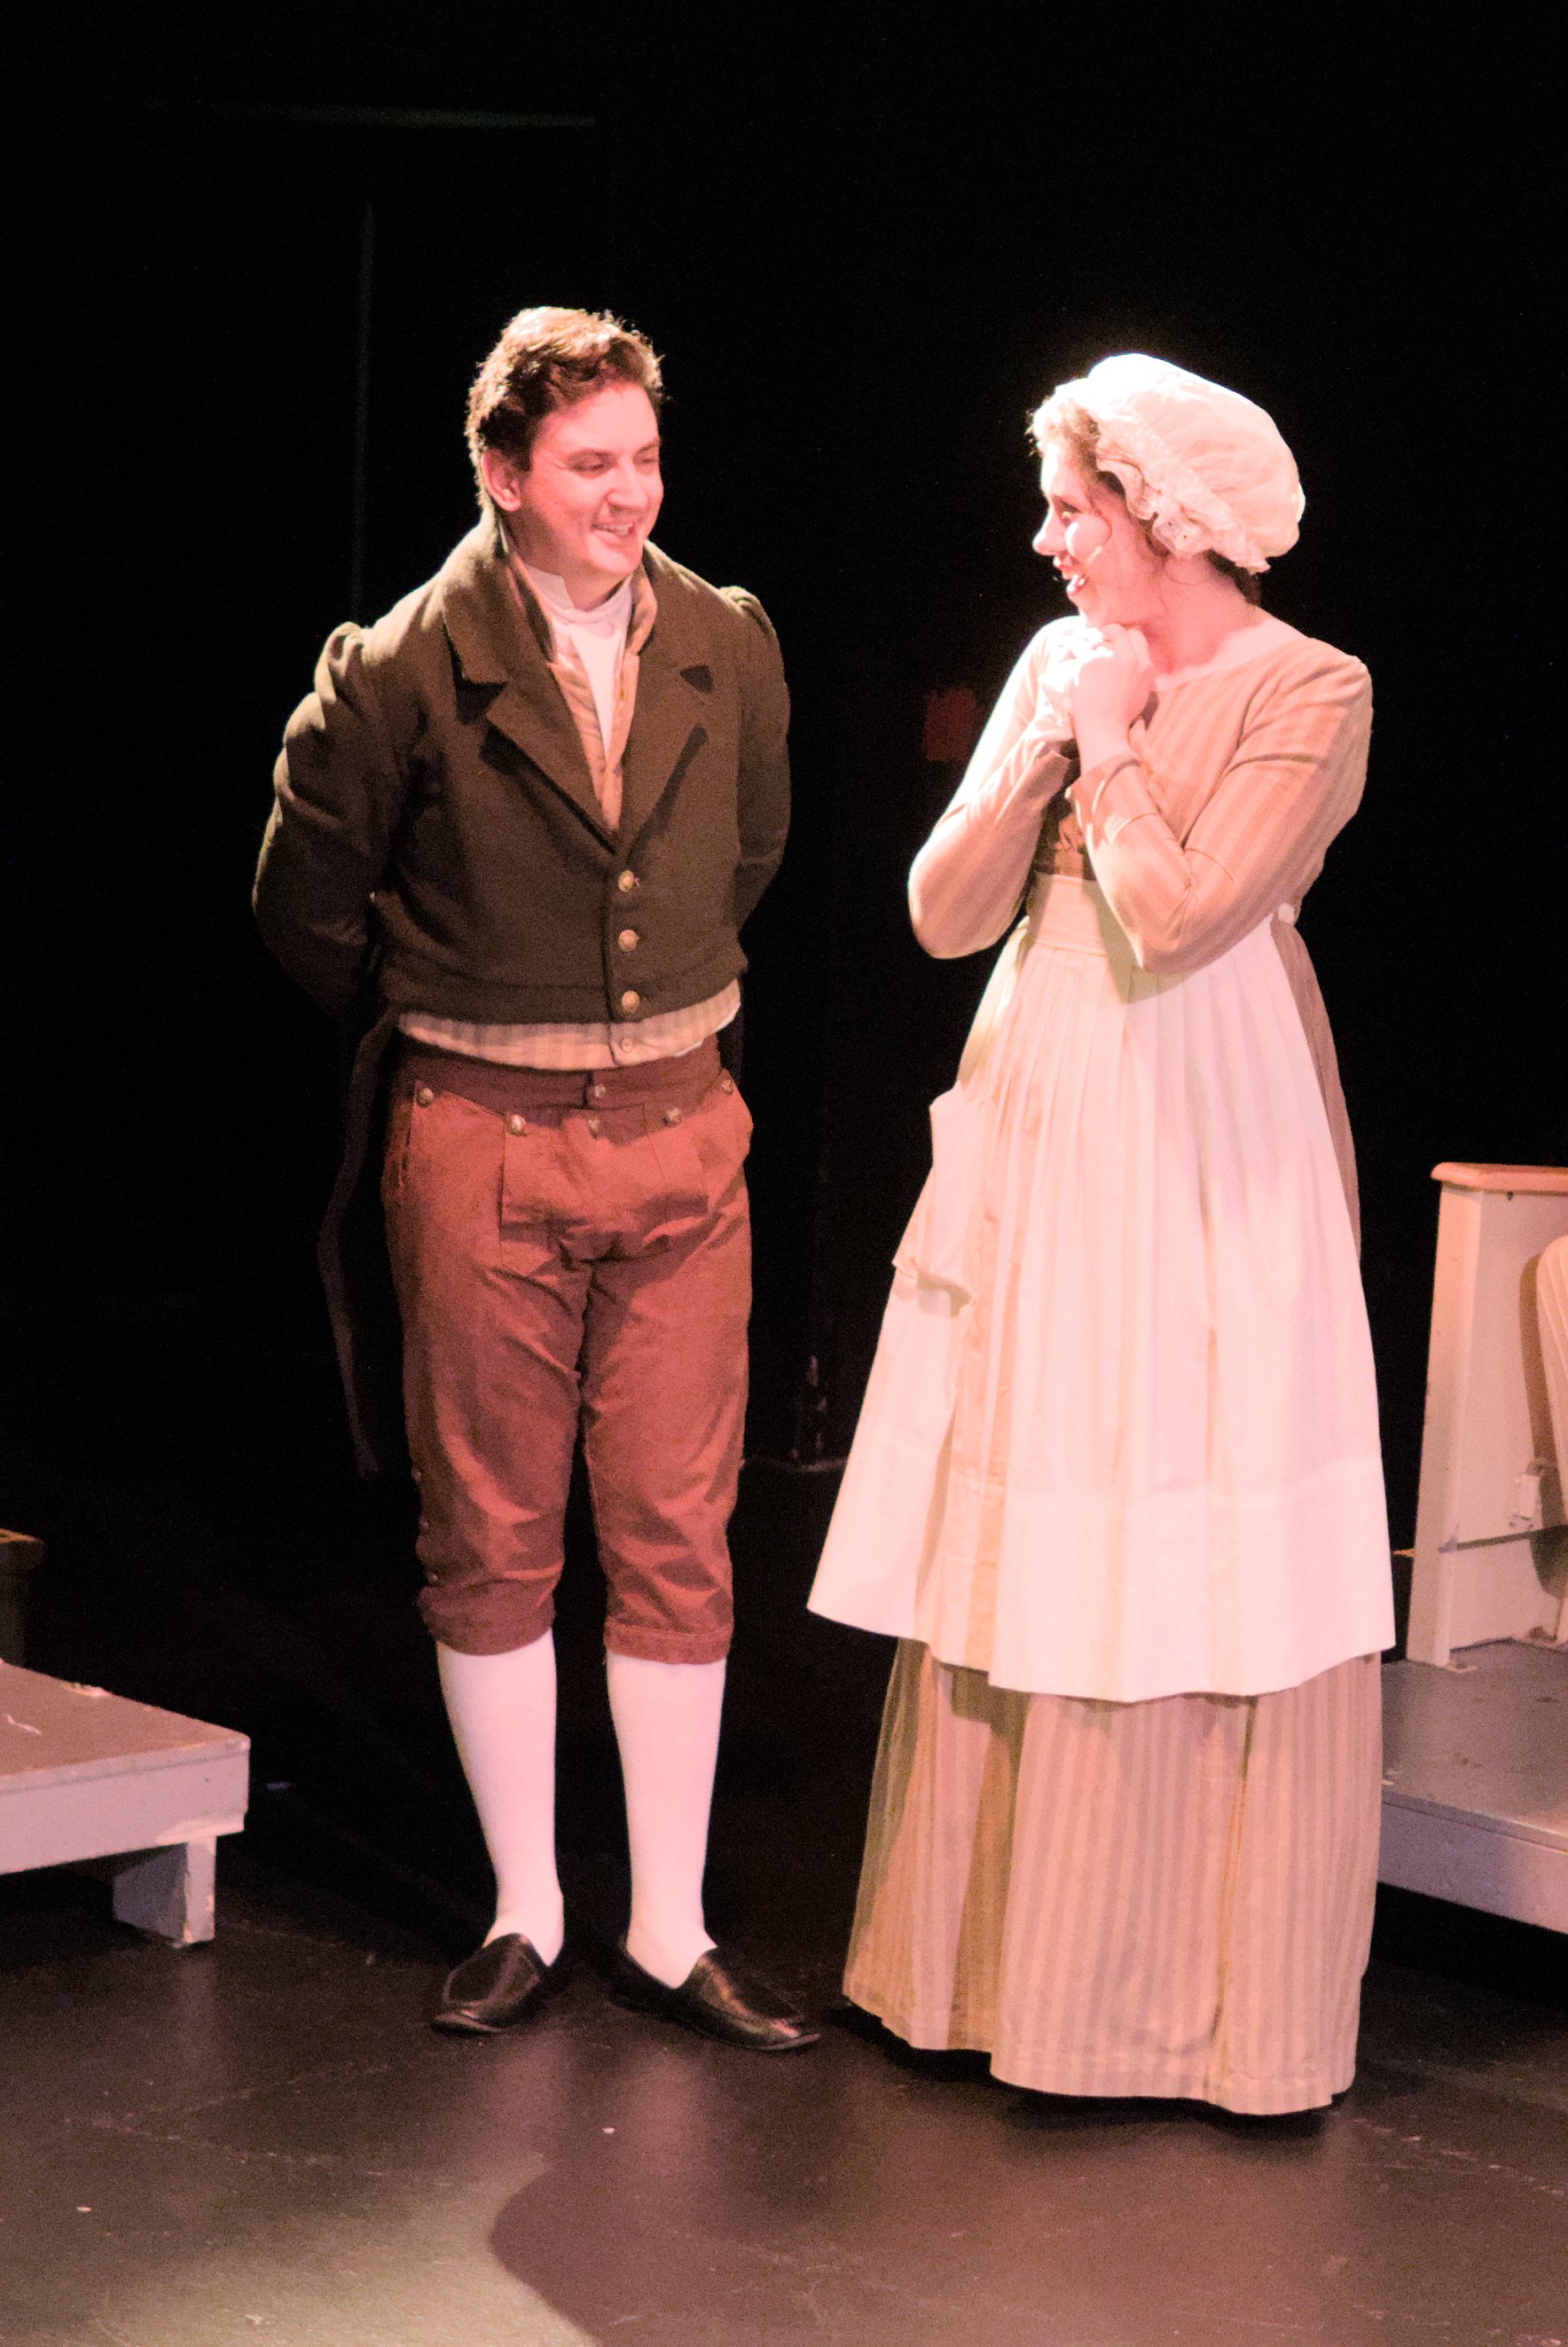 Figaro (Jackson Rosenberry) and Susanna (Rhiannon Talbot) in a lighter moment.